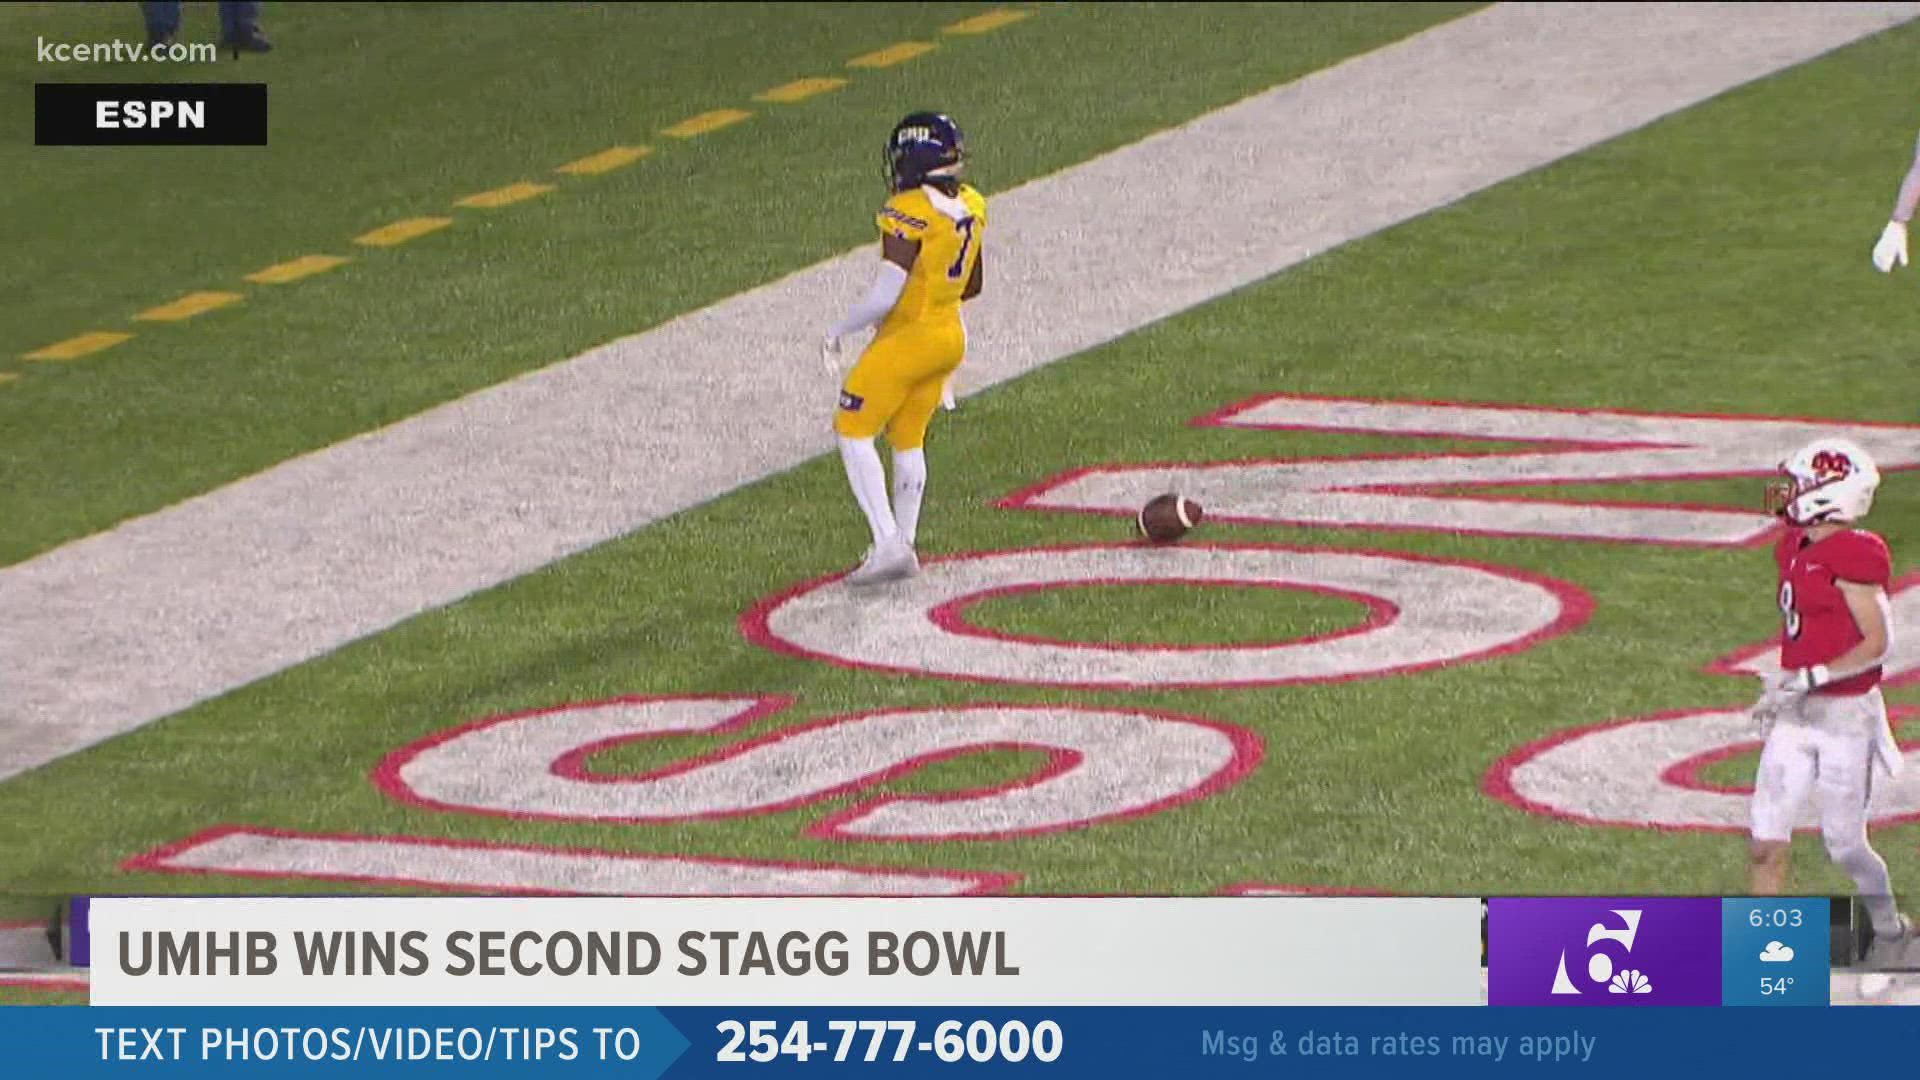 The UMHB Crusaders defeat North Central College in the Stagg Bowl